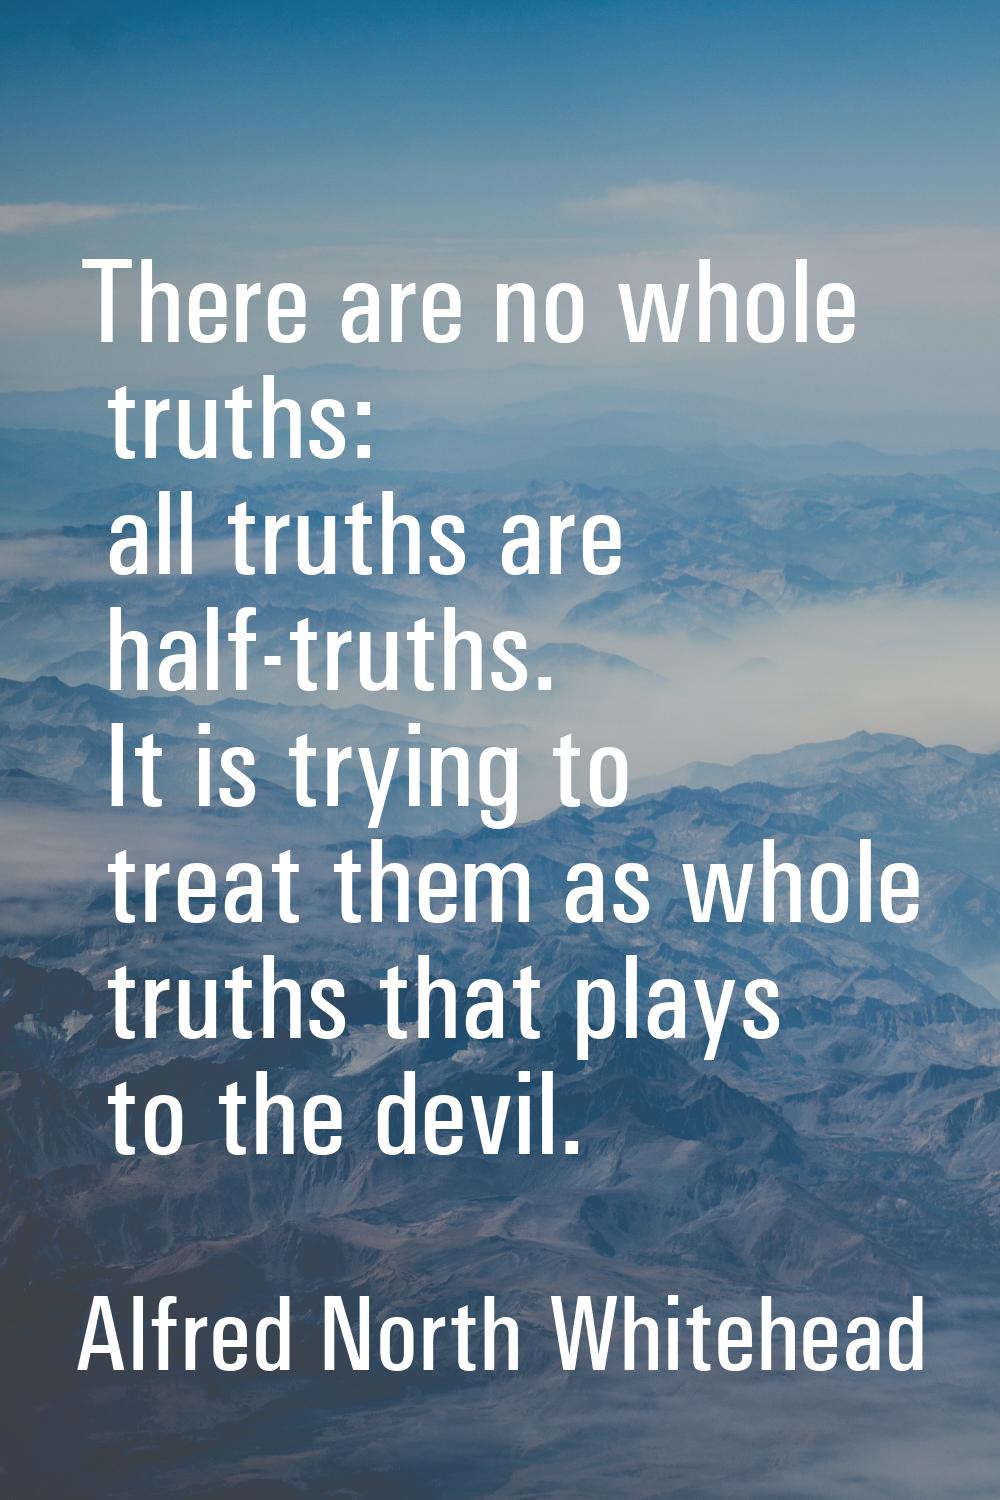 There are no whole truths: all truths are half-truths. It is trying to treat them as whole truths t